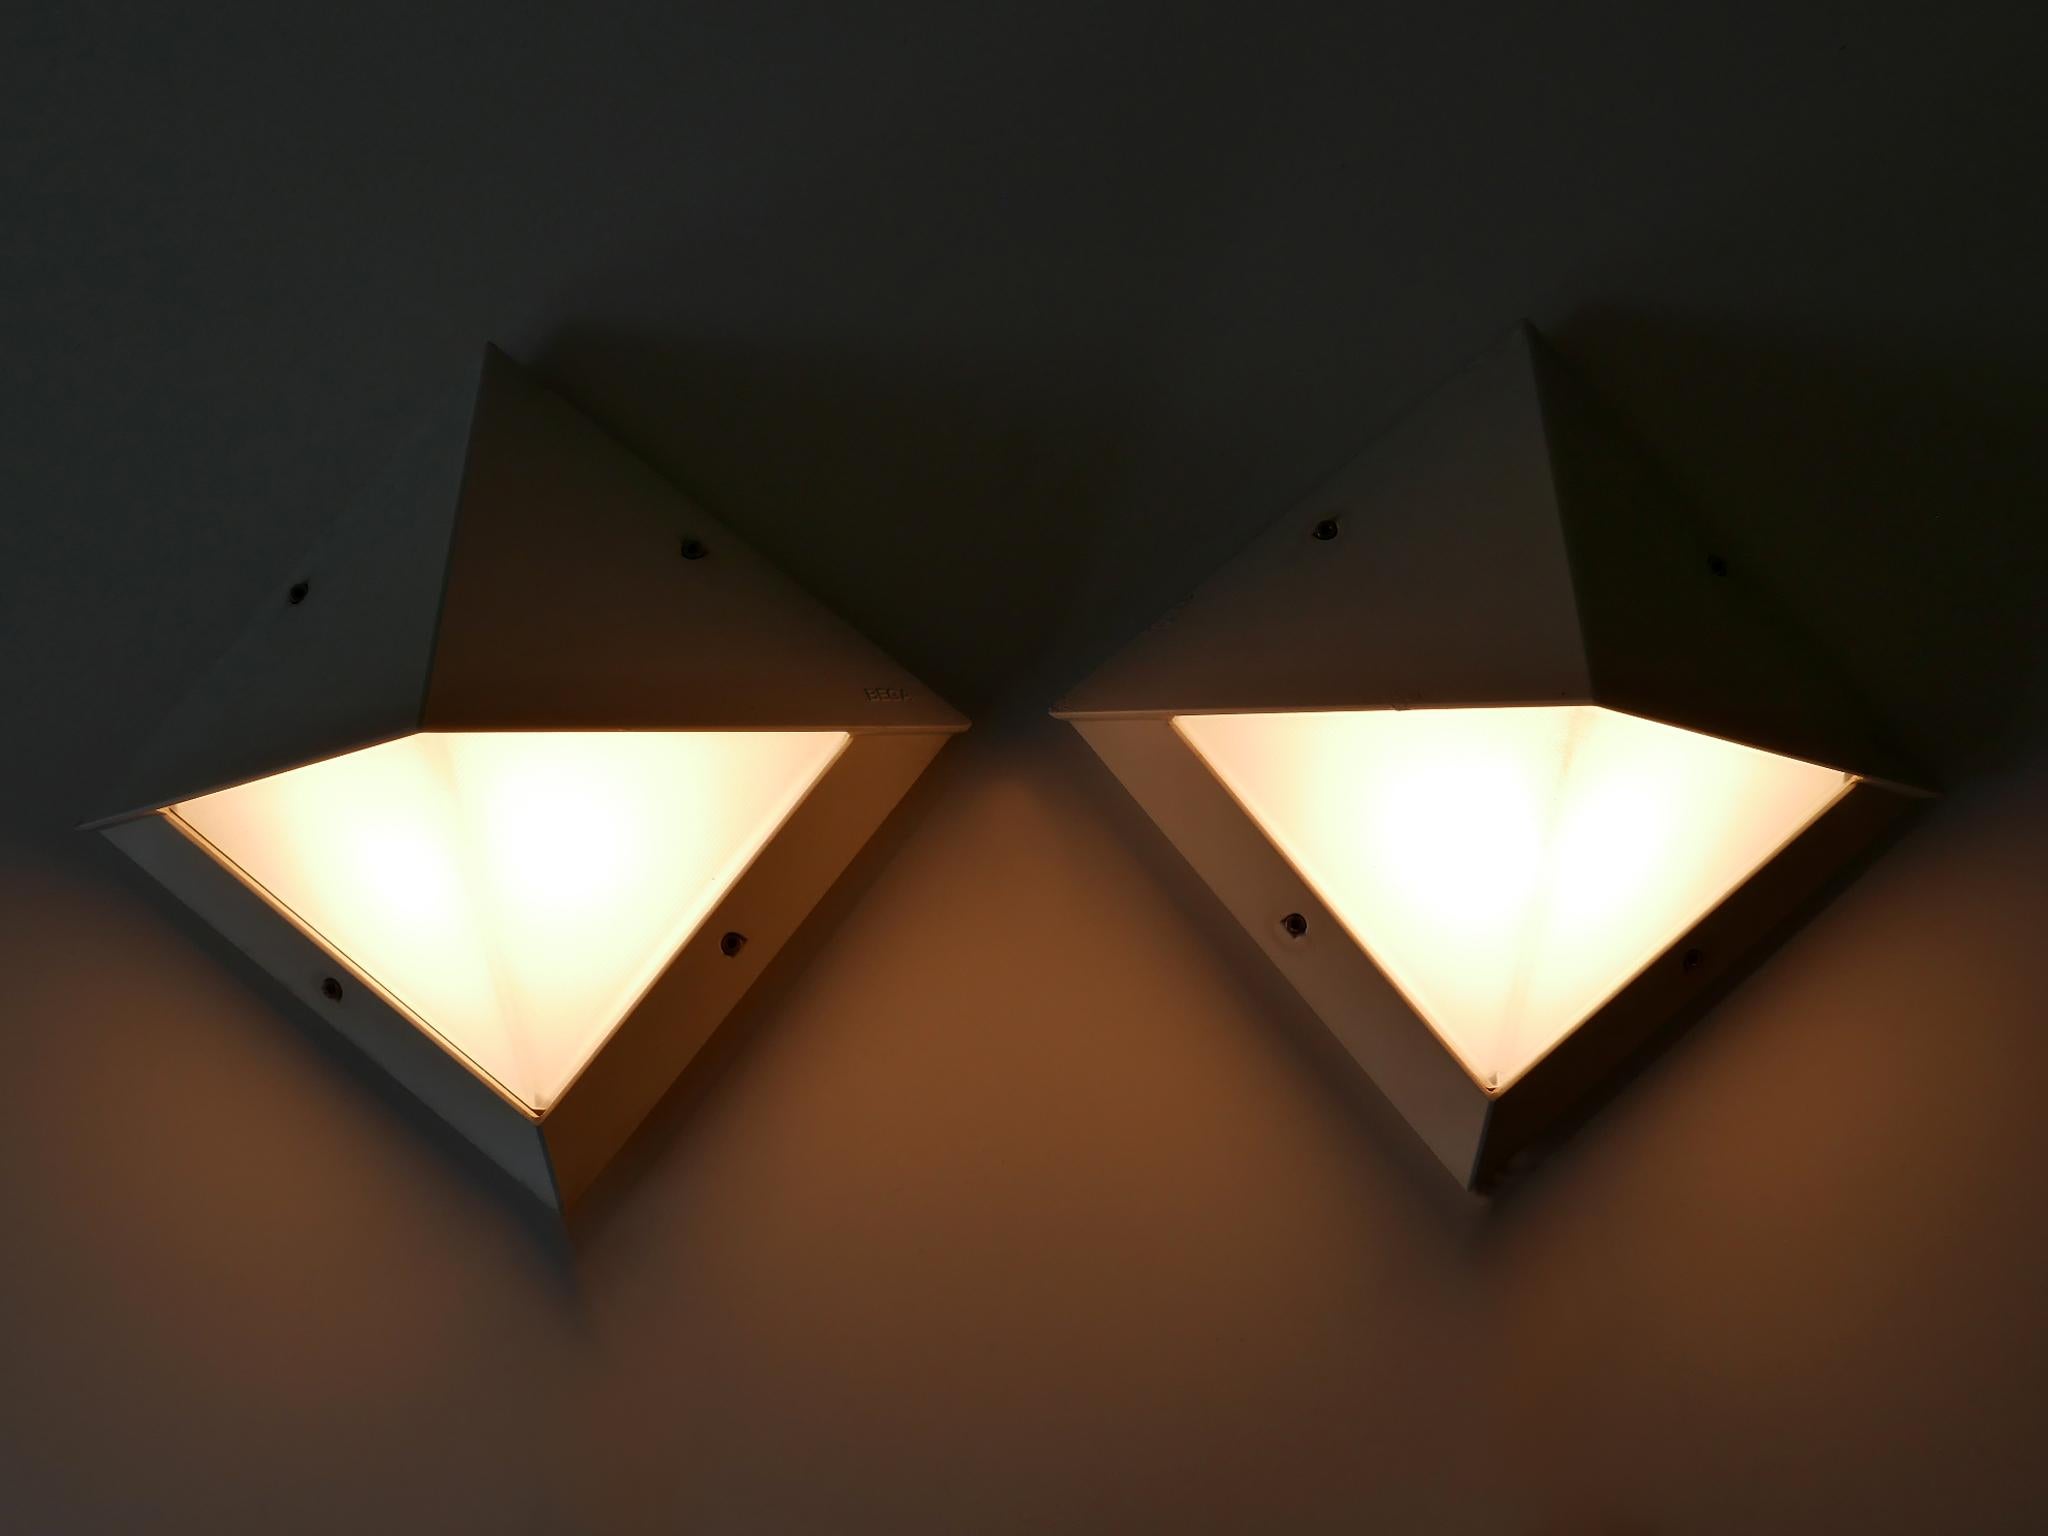 Cast Set of Two Medium Outdoor Wall Lamps or Sconces by BEGA, 1980s, Germany For Sale